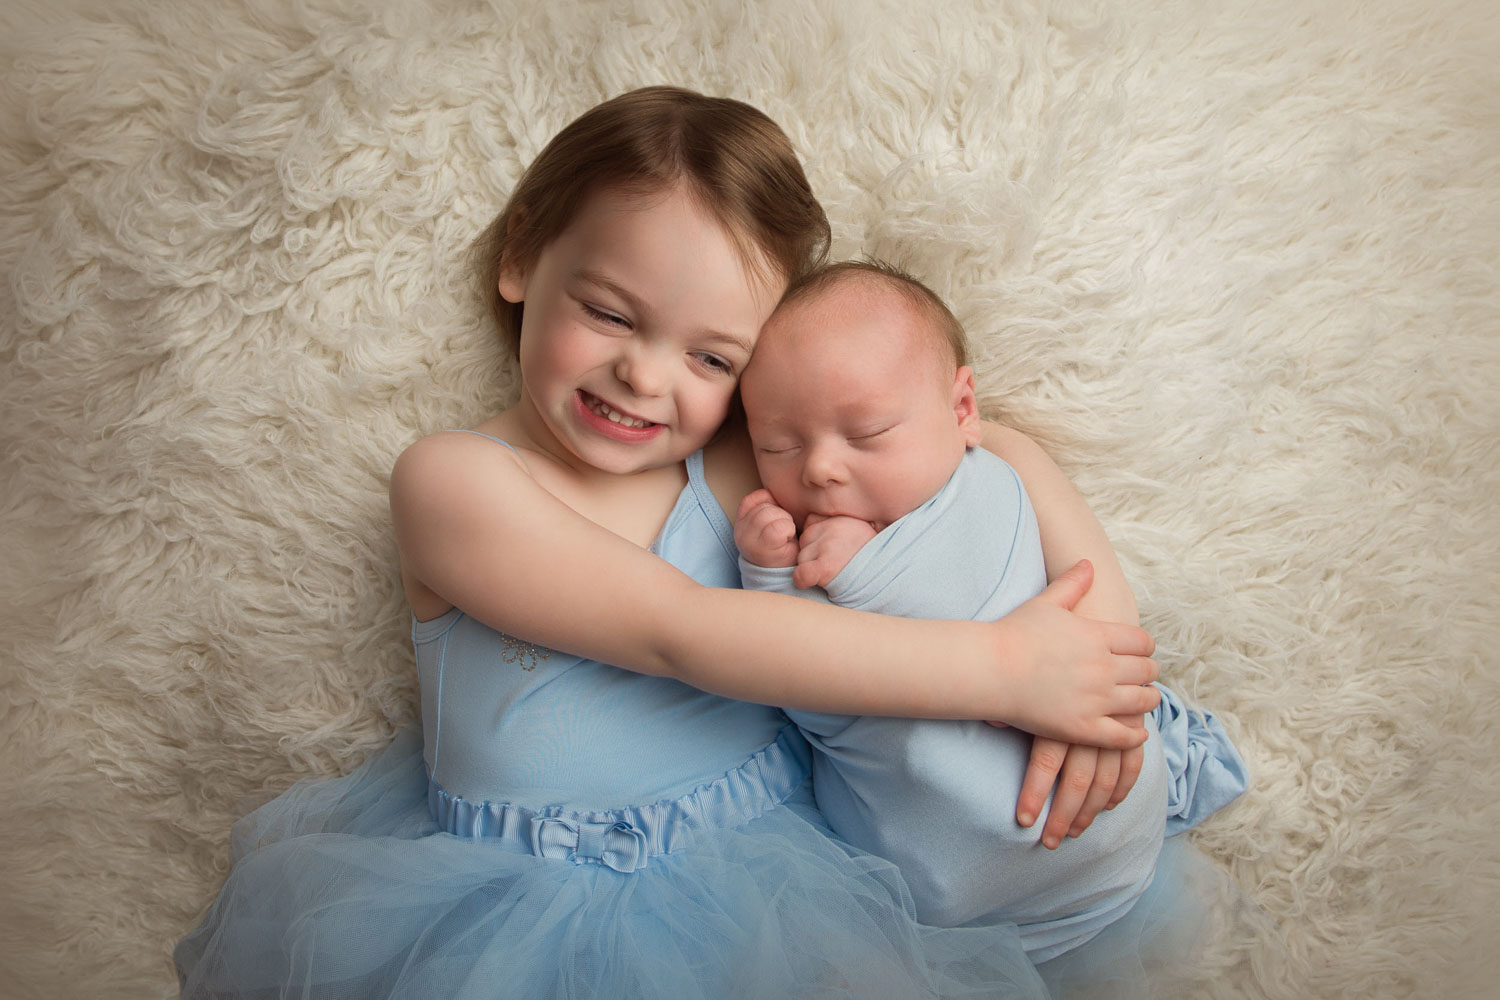 Photograph of newborn baby and sister by auckland newborn photographer siobhan kelly photography